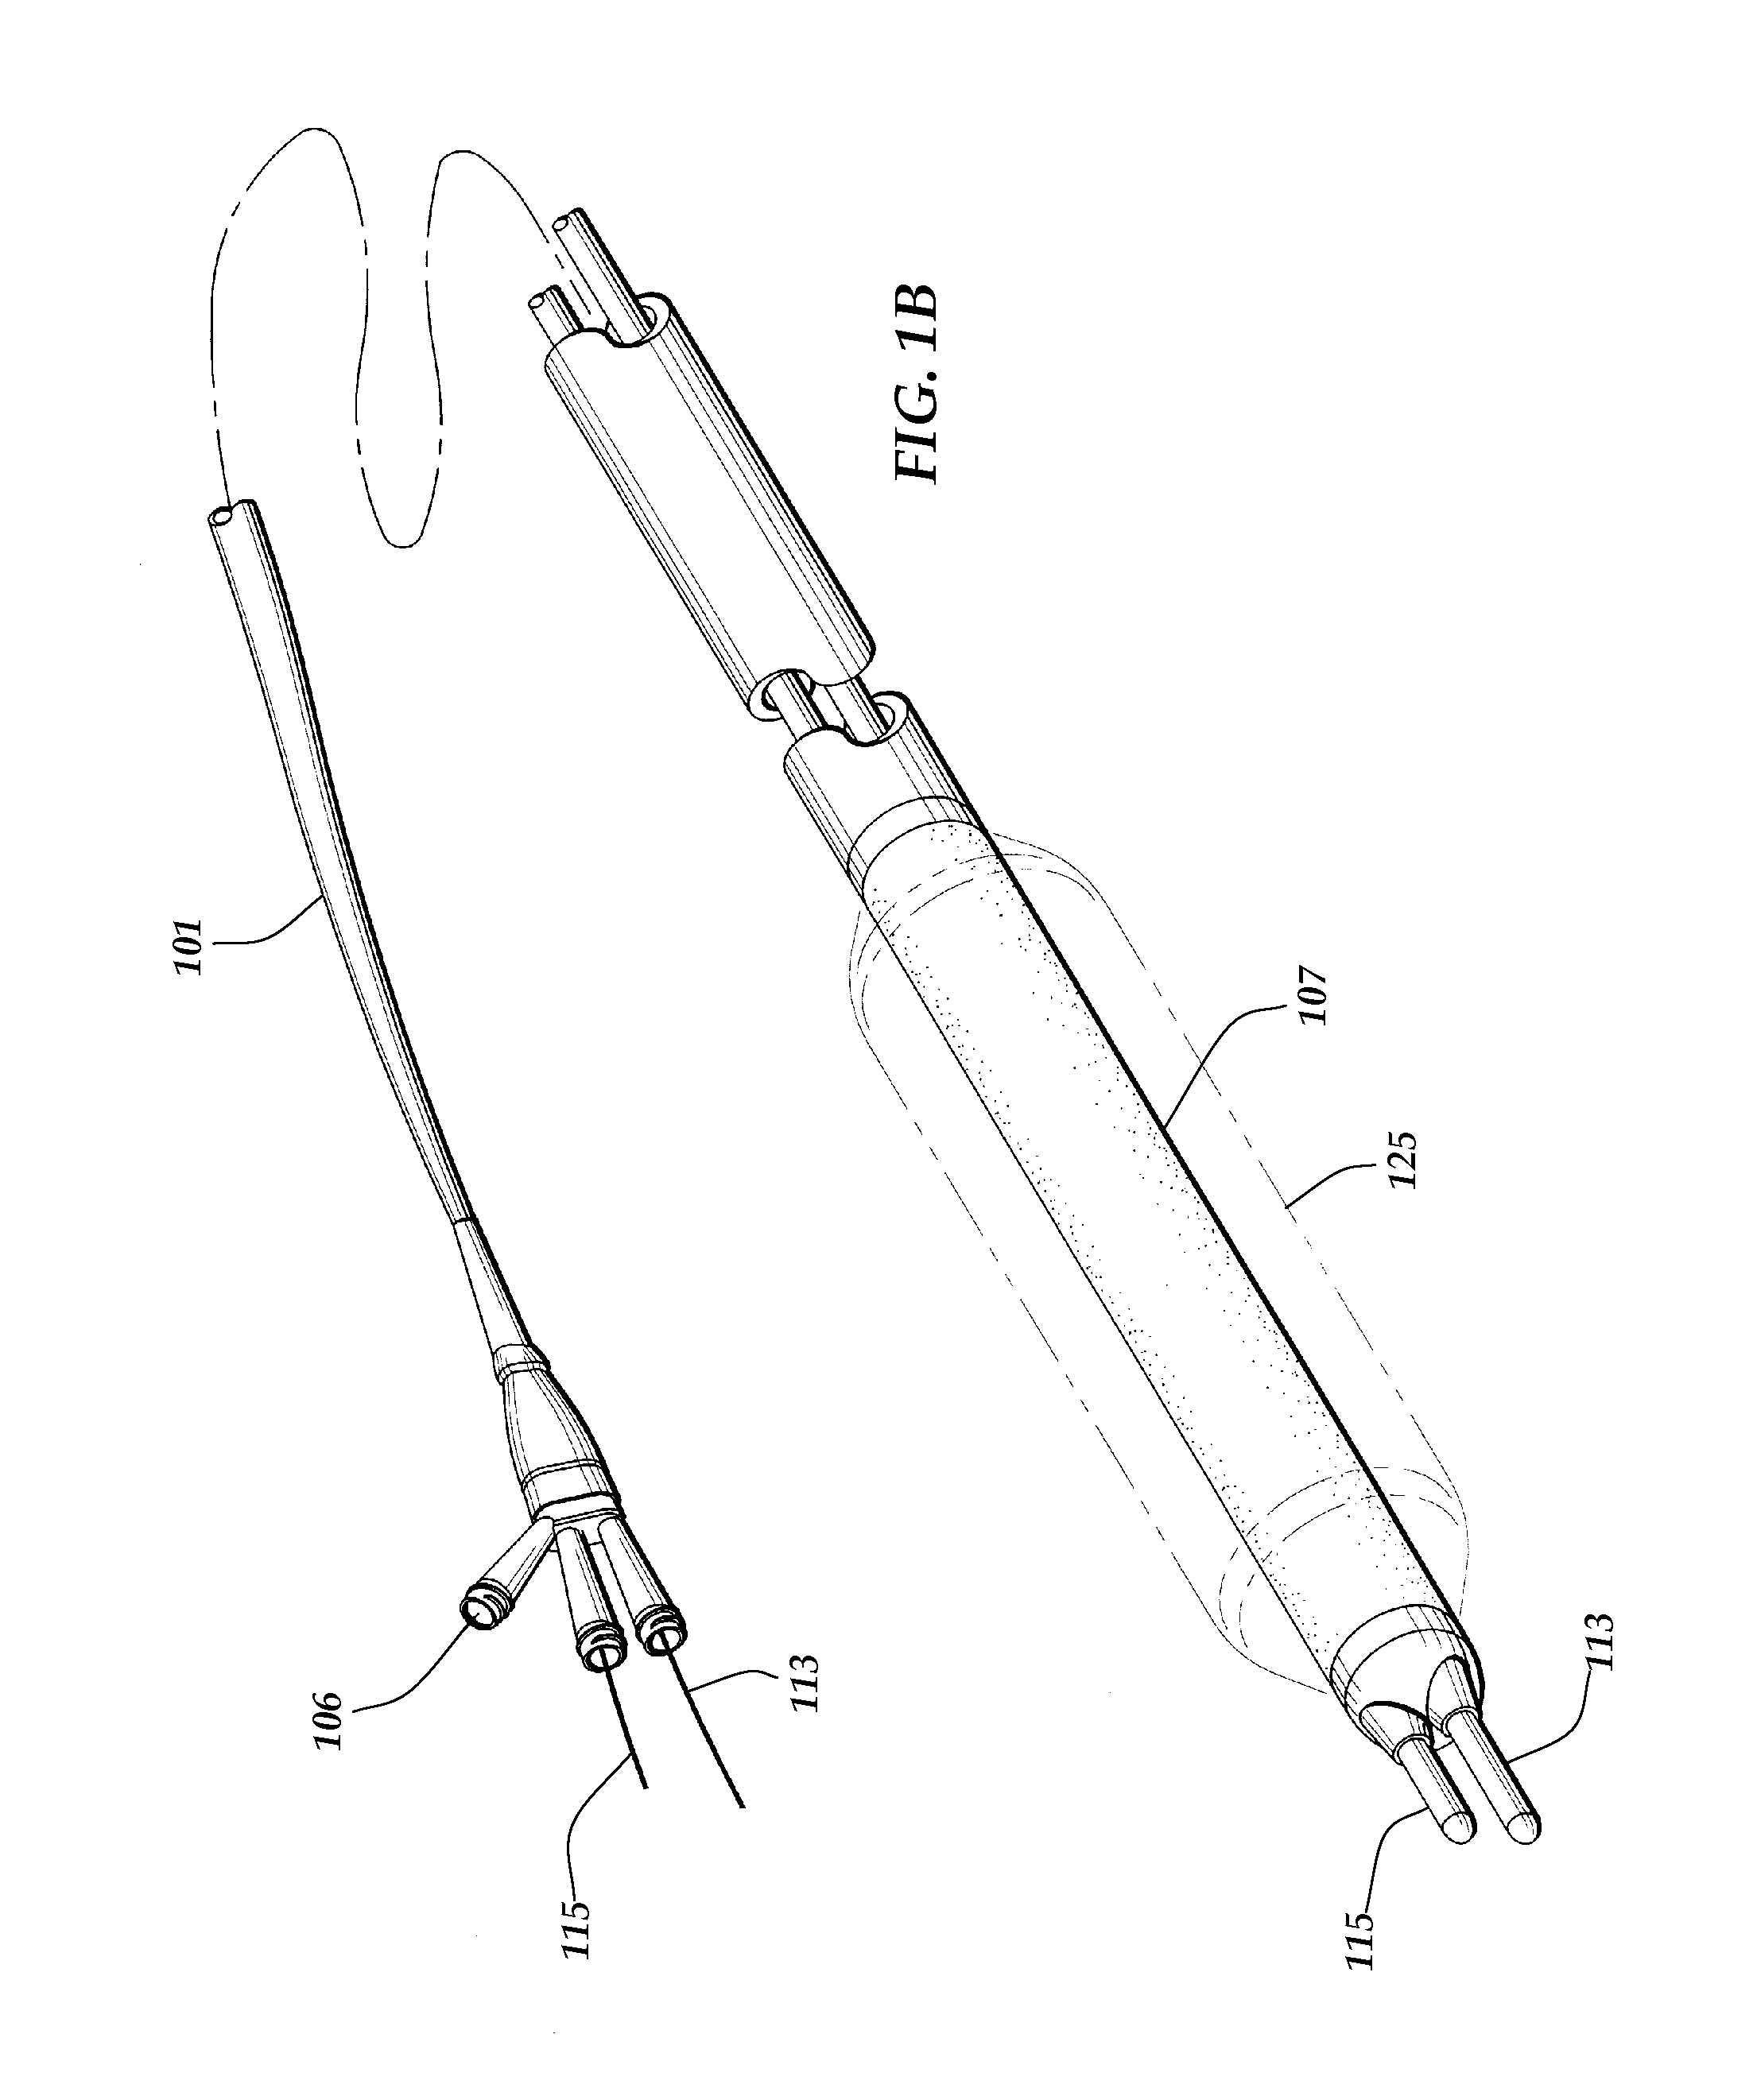 Apparatus and method for treatment of bifurcation lesions